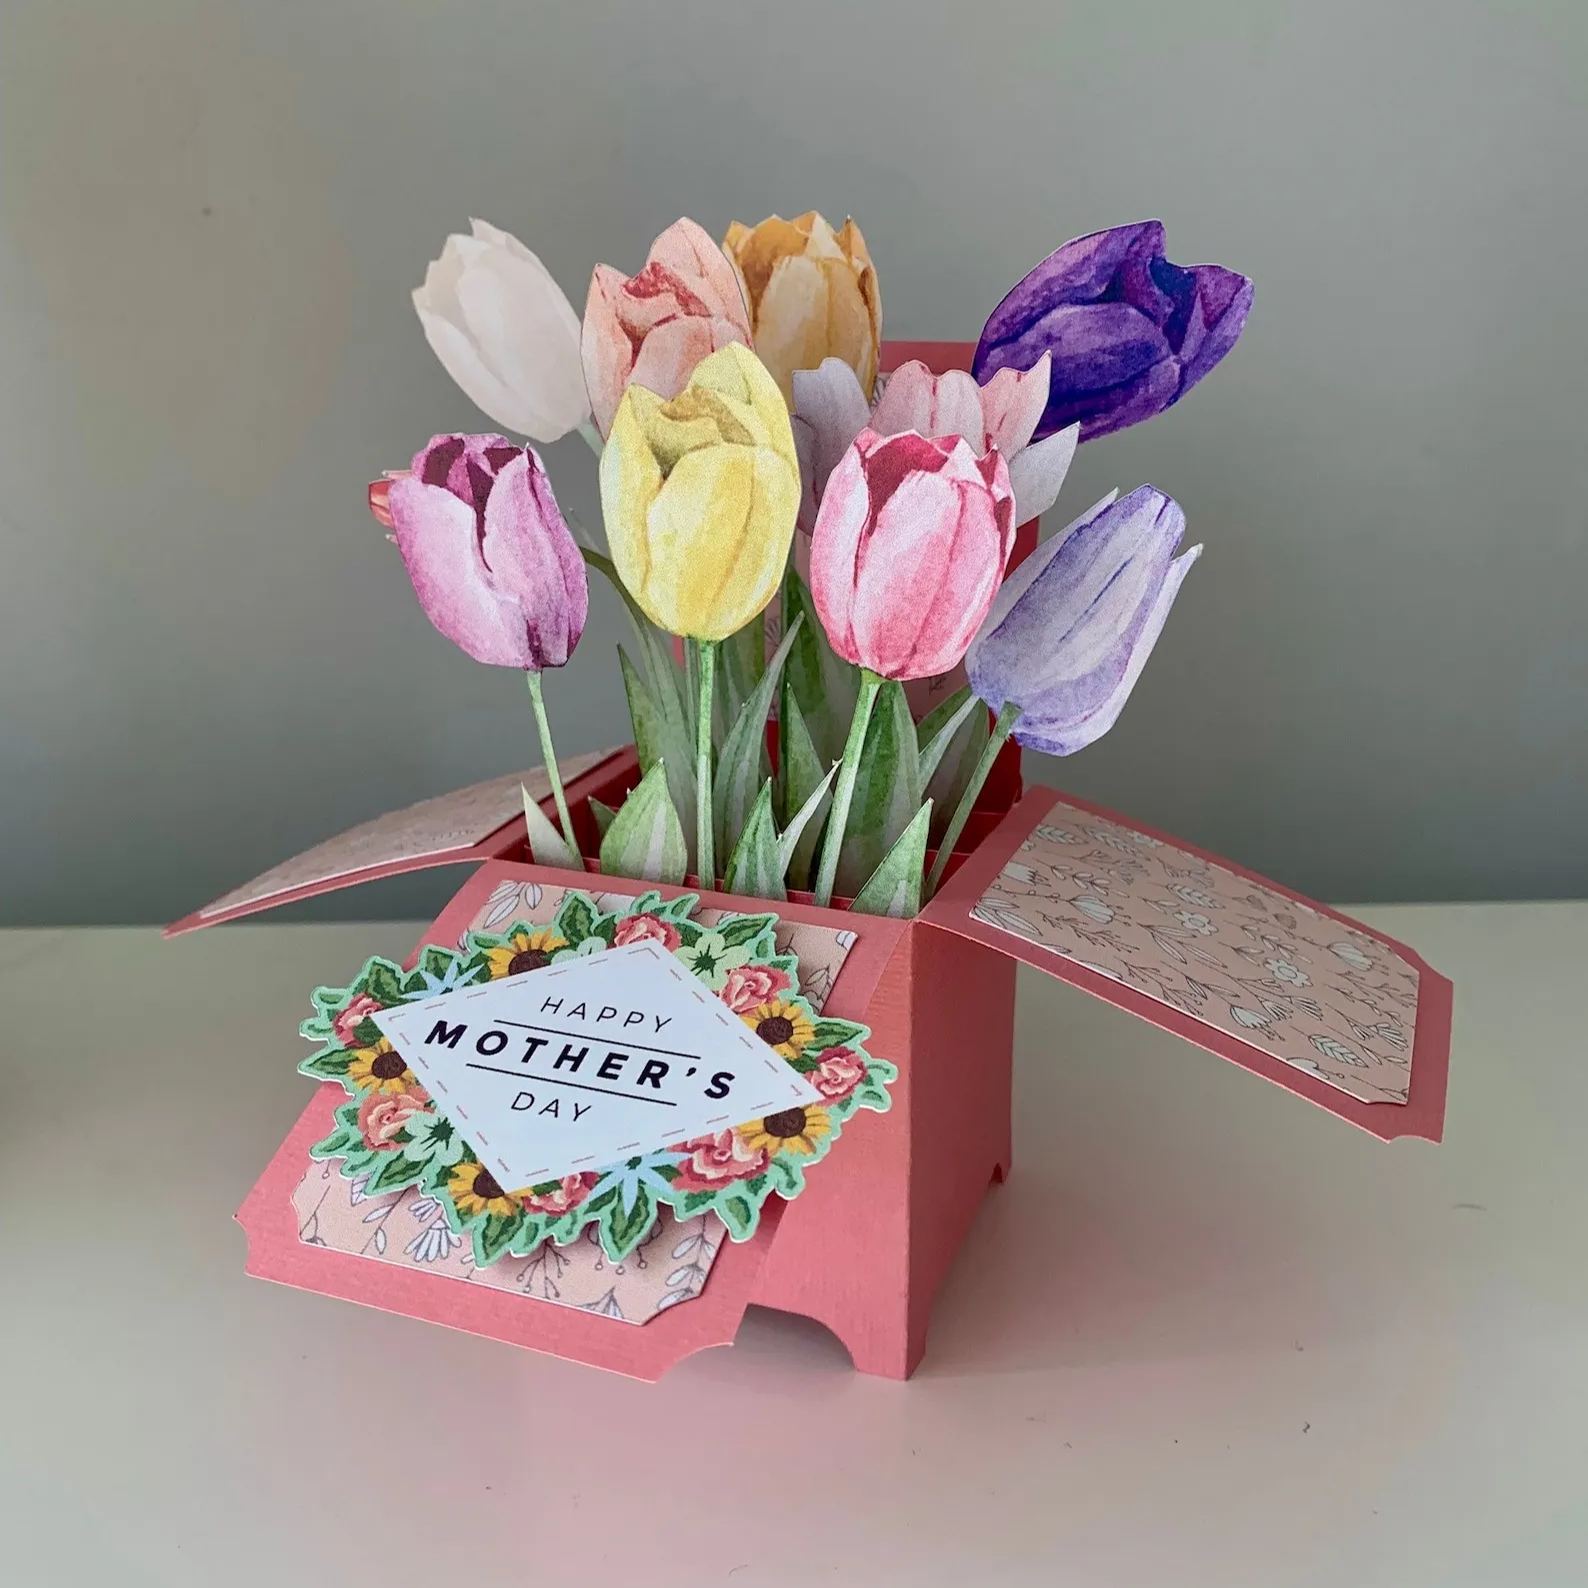 3D Pop Up Handmade Flower Box-Happy Mother's Day